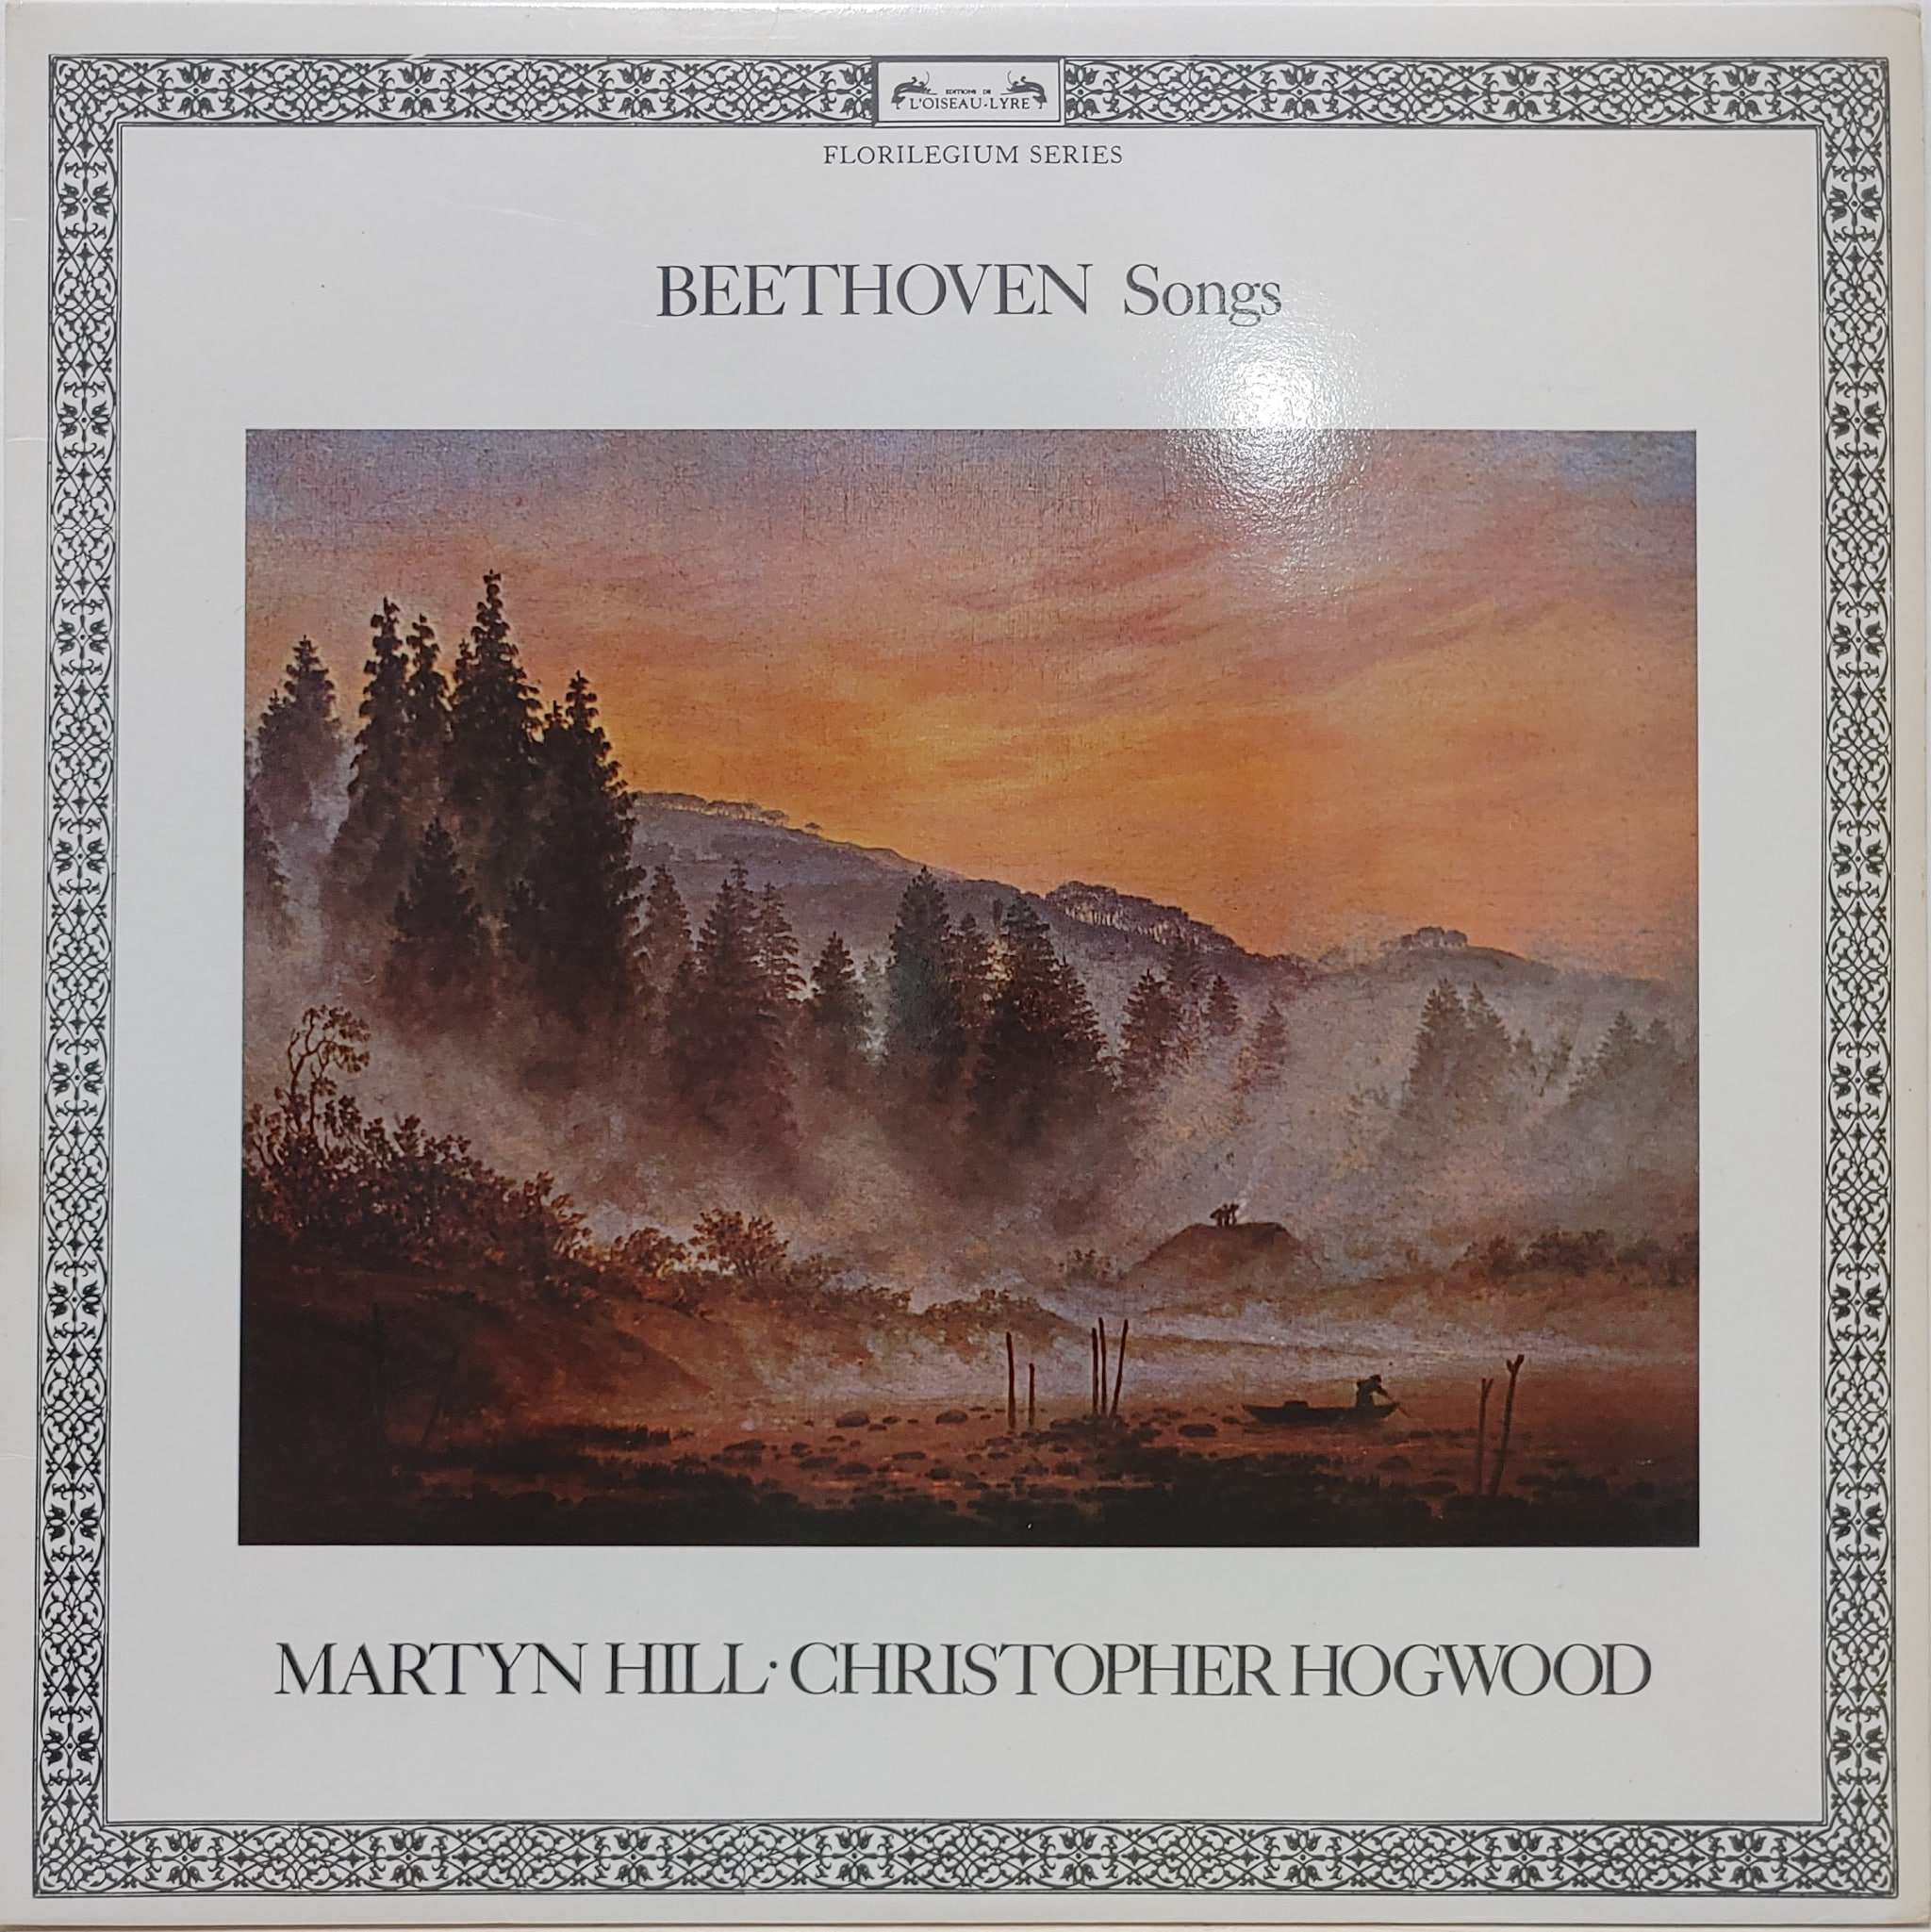 BEETHVEN SONGS / MARTYN HILL CHRISTOPHER HOGWOOD